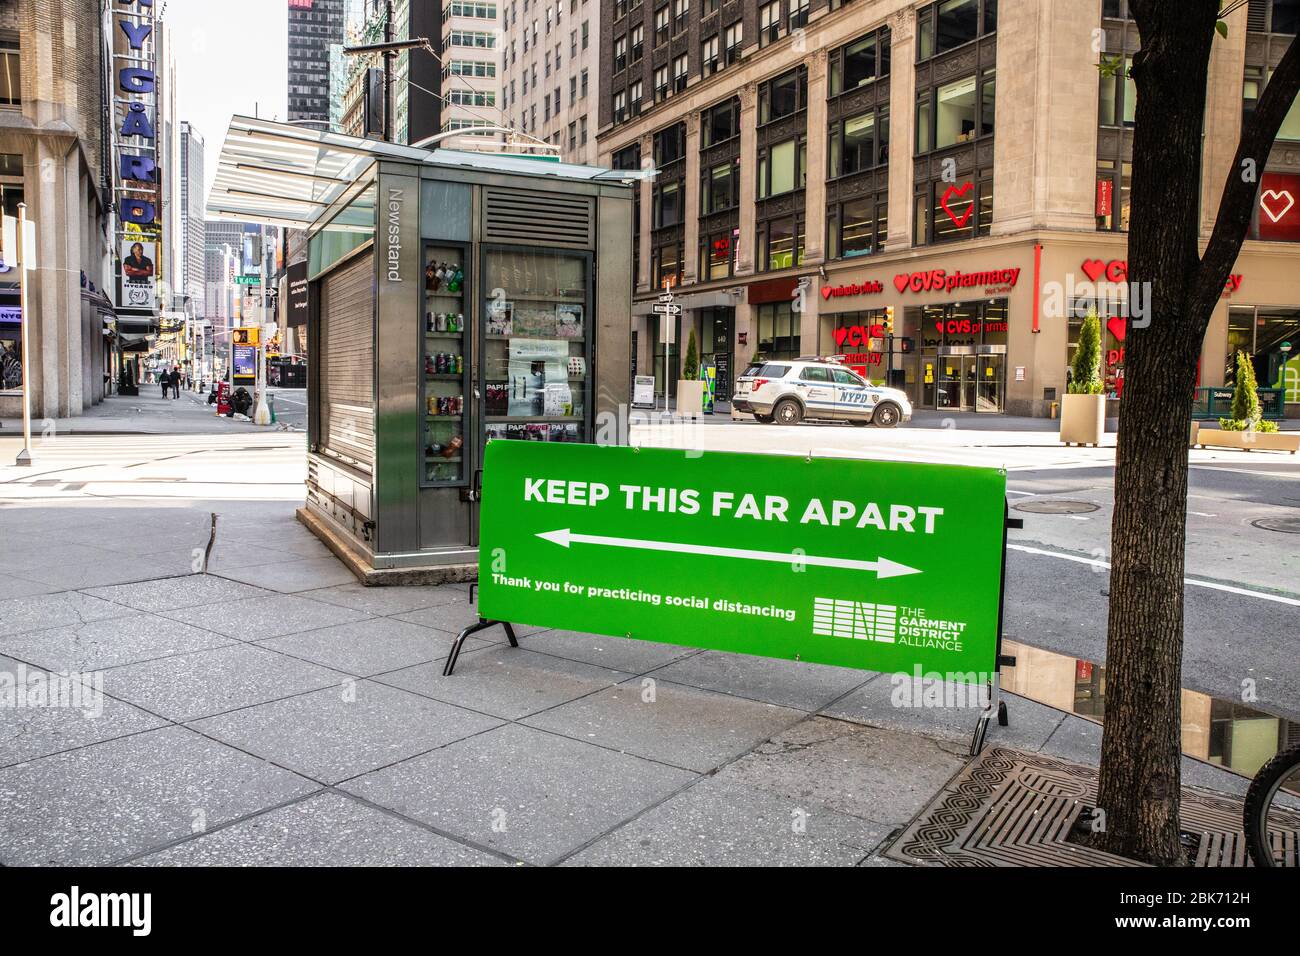 New York City, New York, USA - April 20, 2020:  View of empty street in Manhattan with sign warning to keep social distancing during the Covid-19 Coro Stock Photo